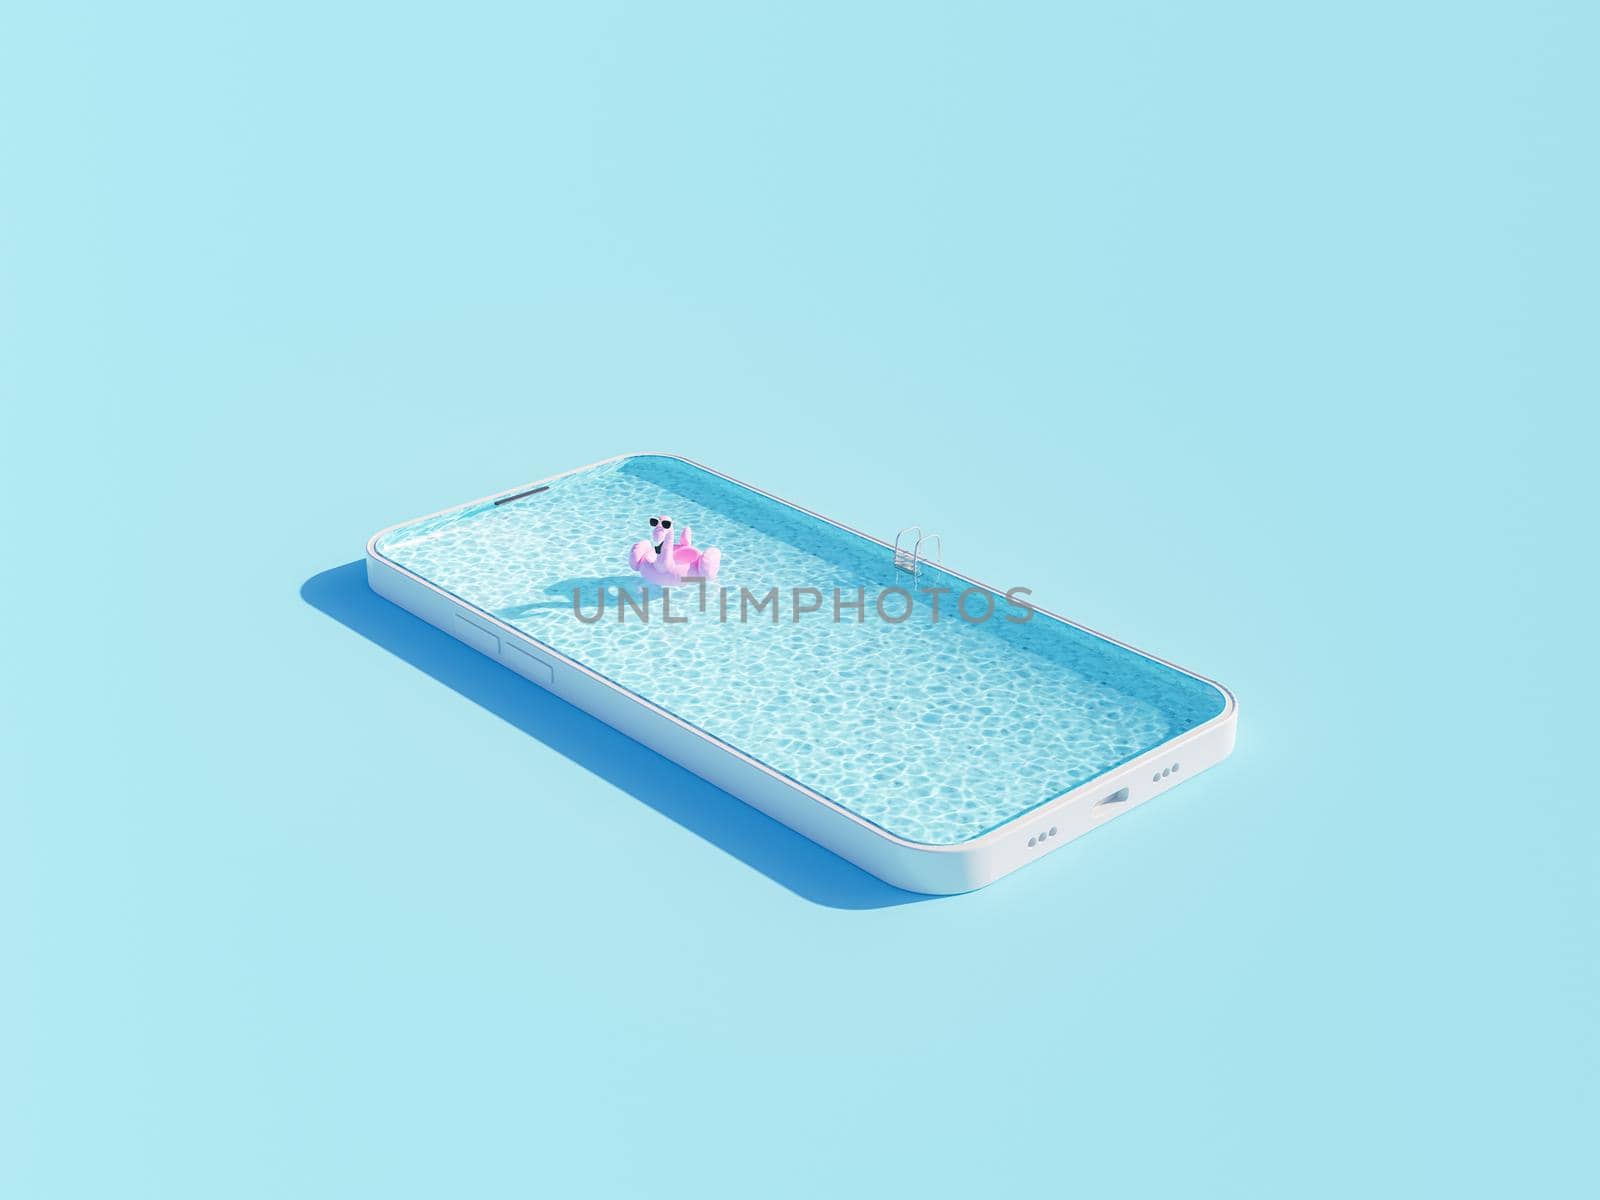 3D rendering of pool in smartphone case on blue surface by asolano